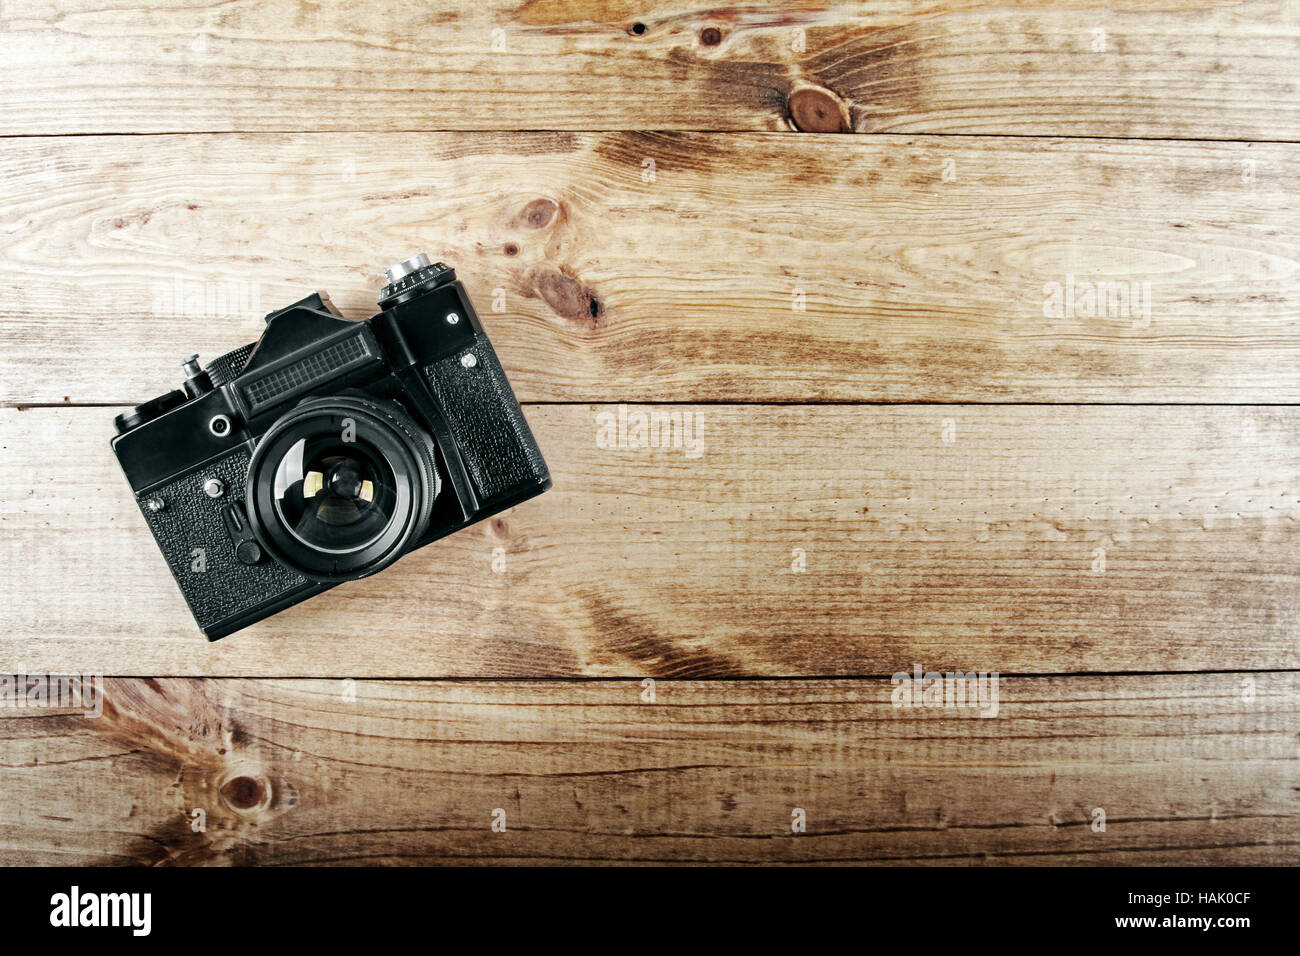 old vintage photo camera on wooden table Stock Photo